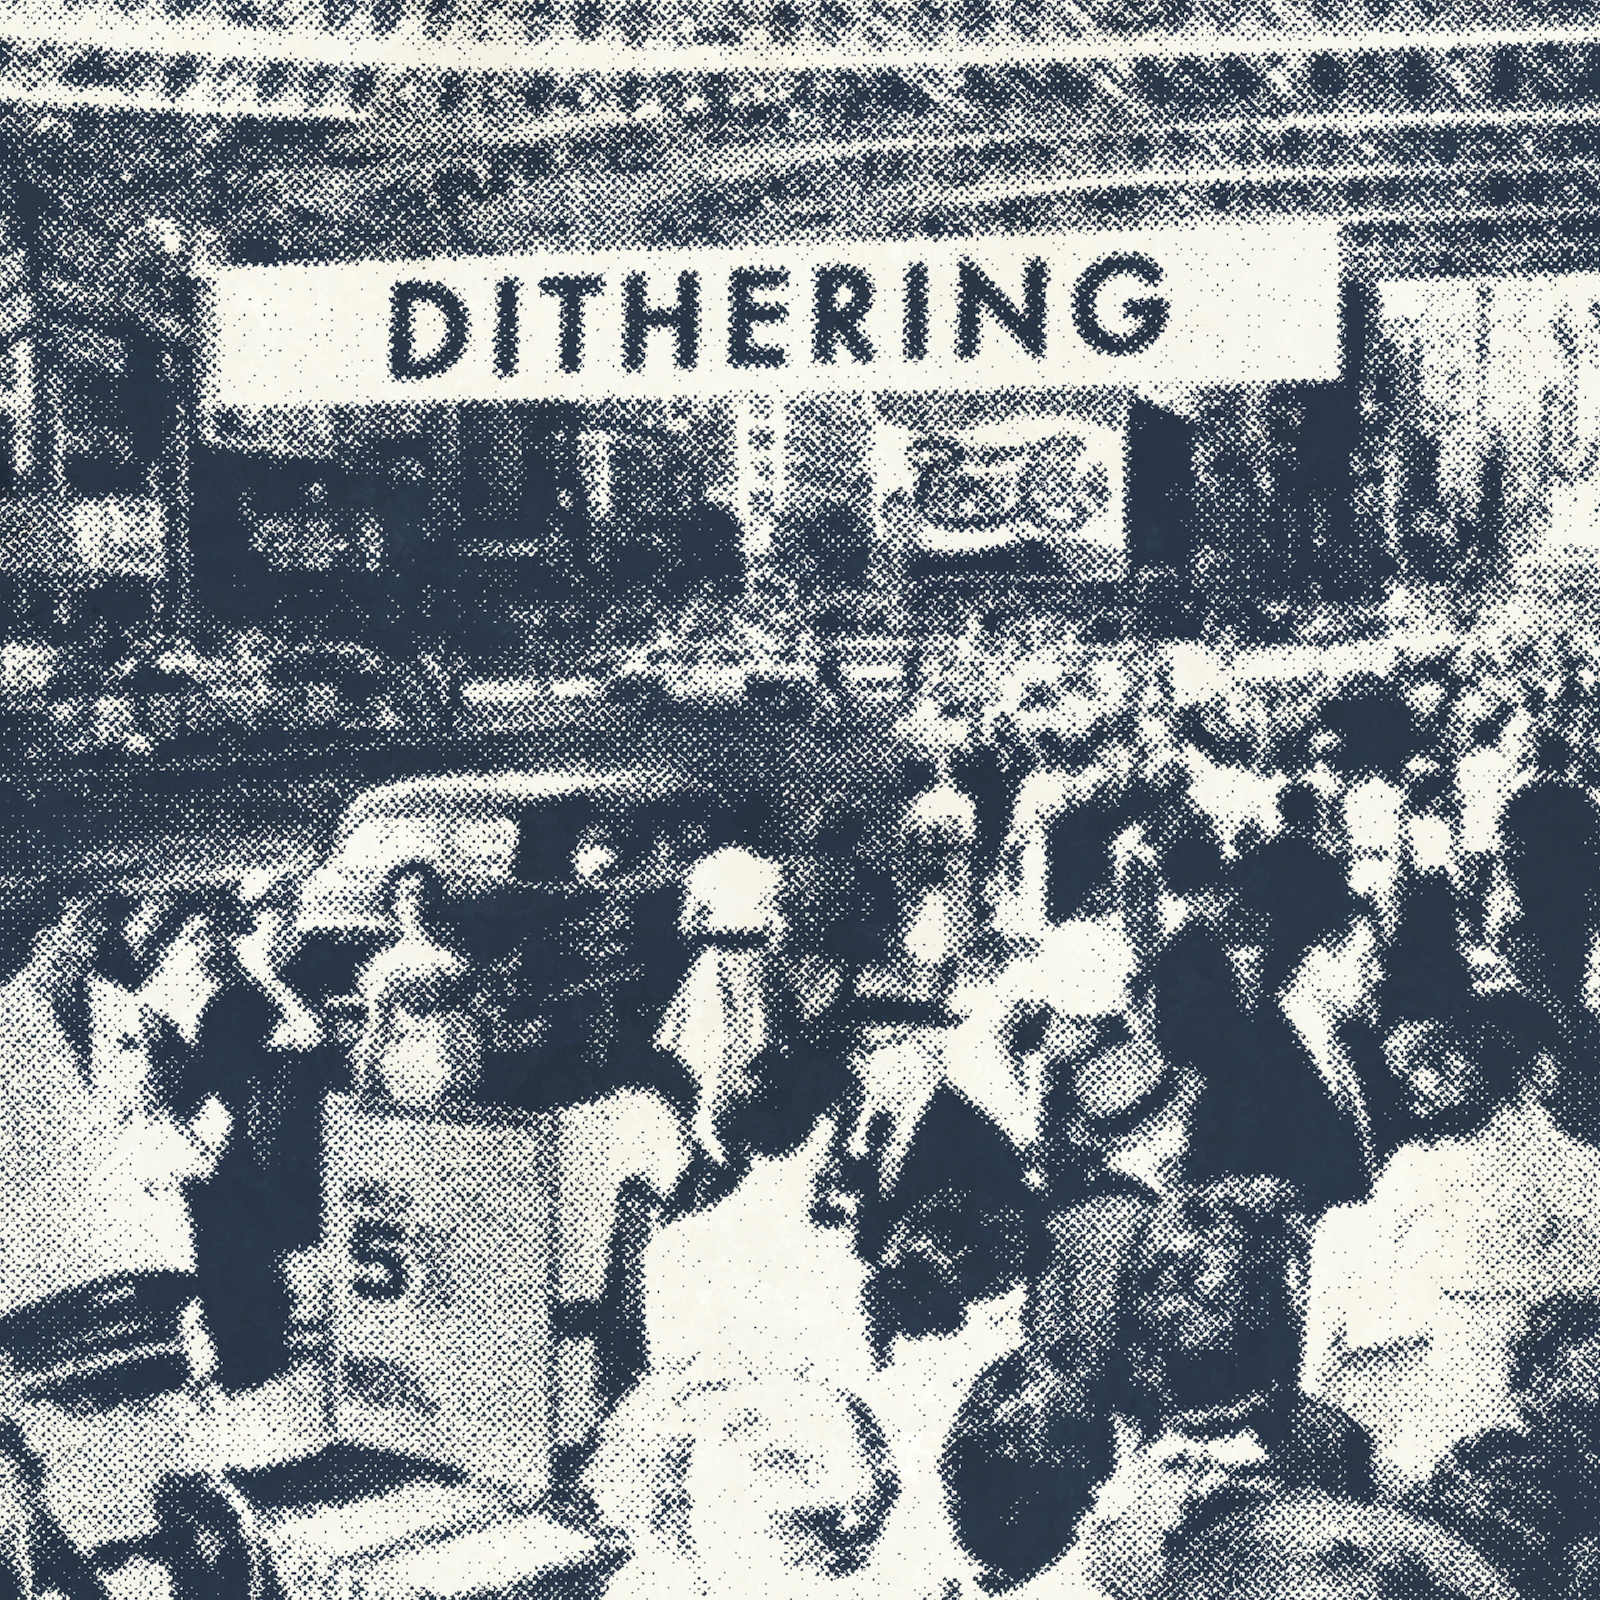 September 2023 cover art for Dithering, depicting a crowd of people with a “Dithering” sign in the background.